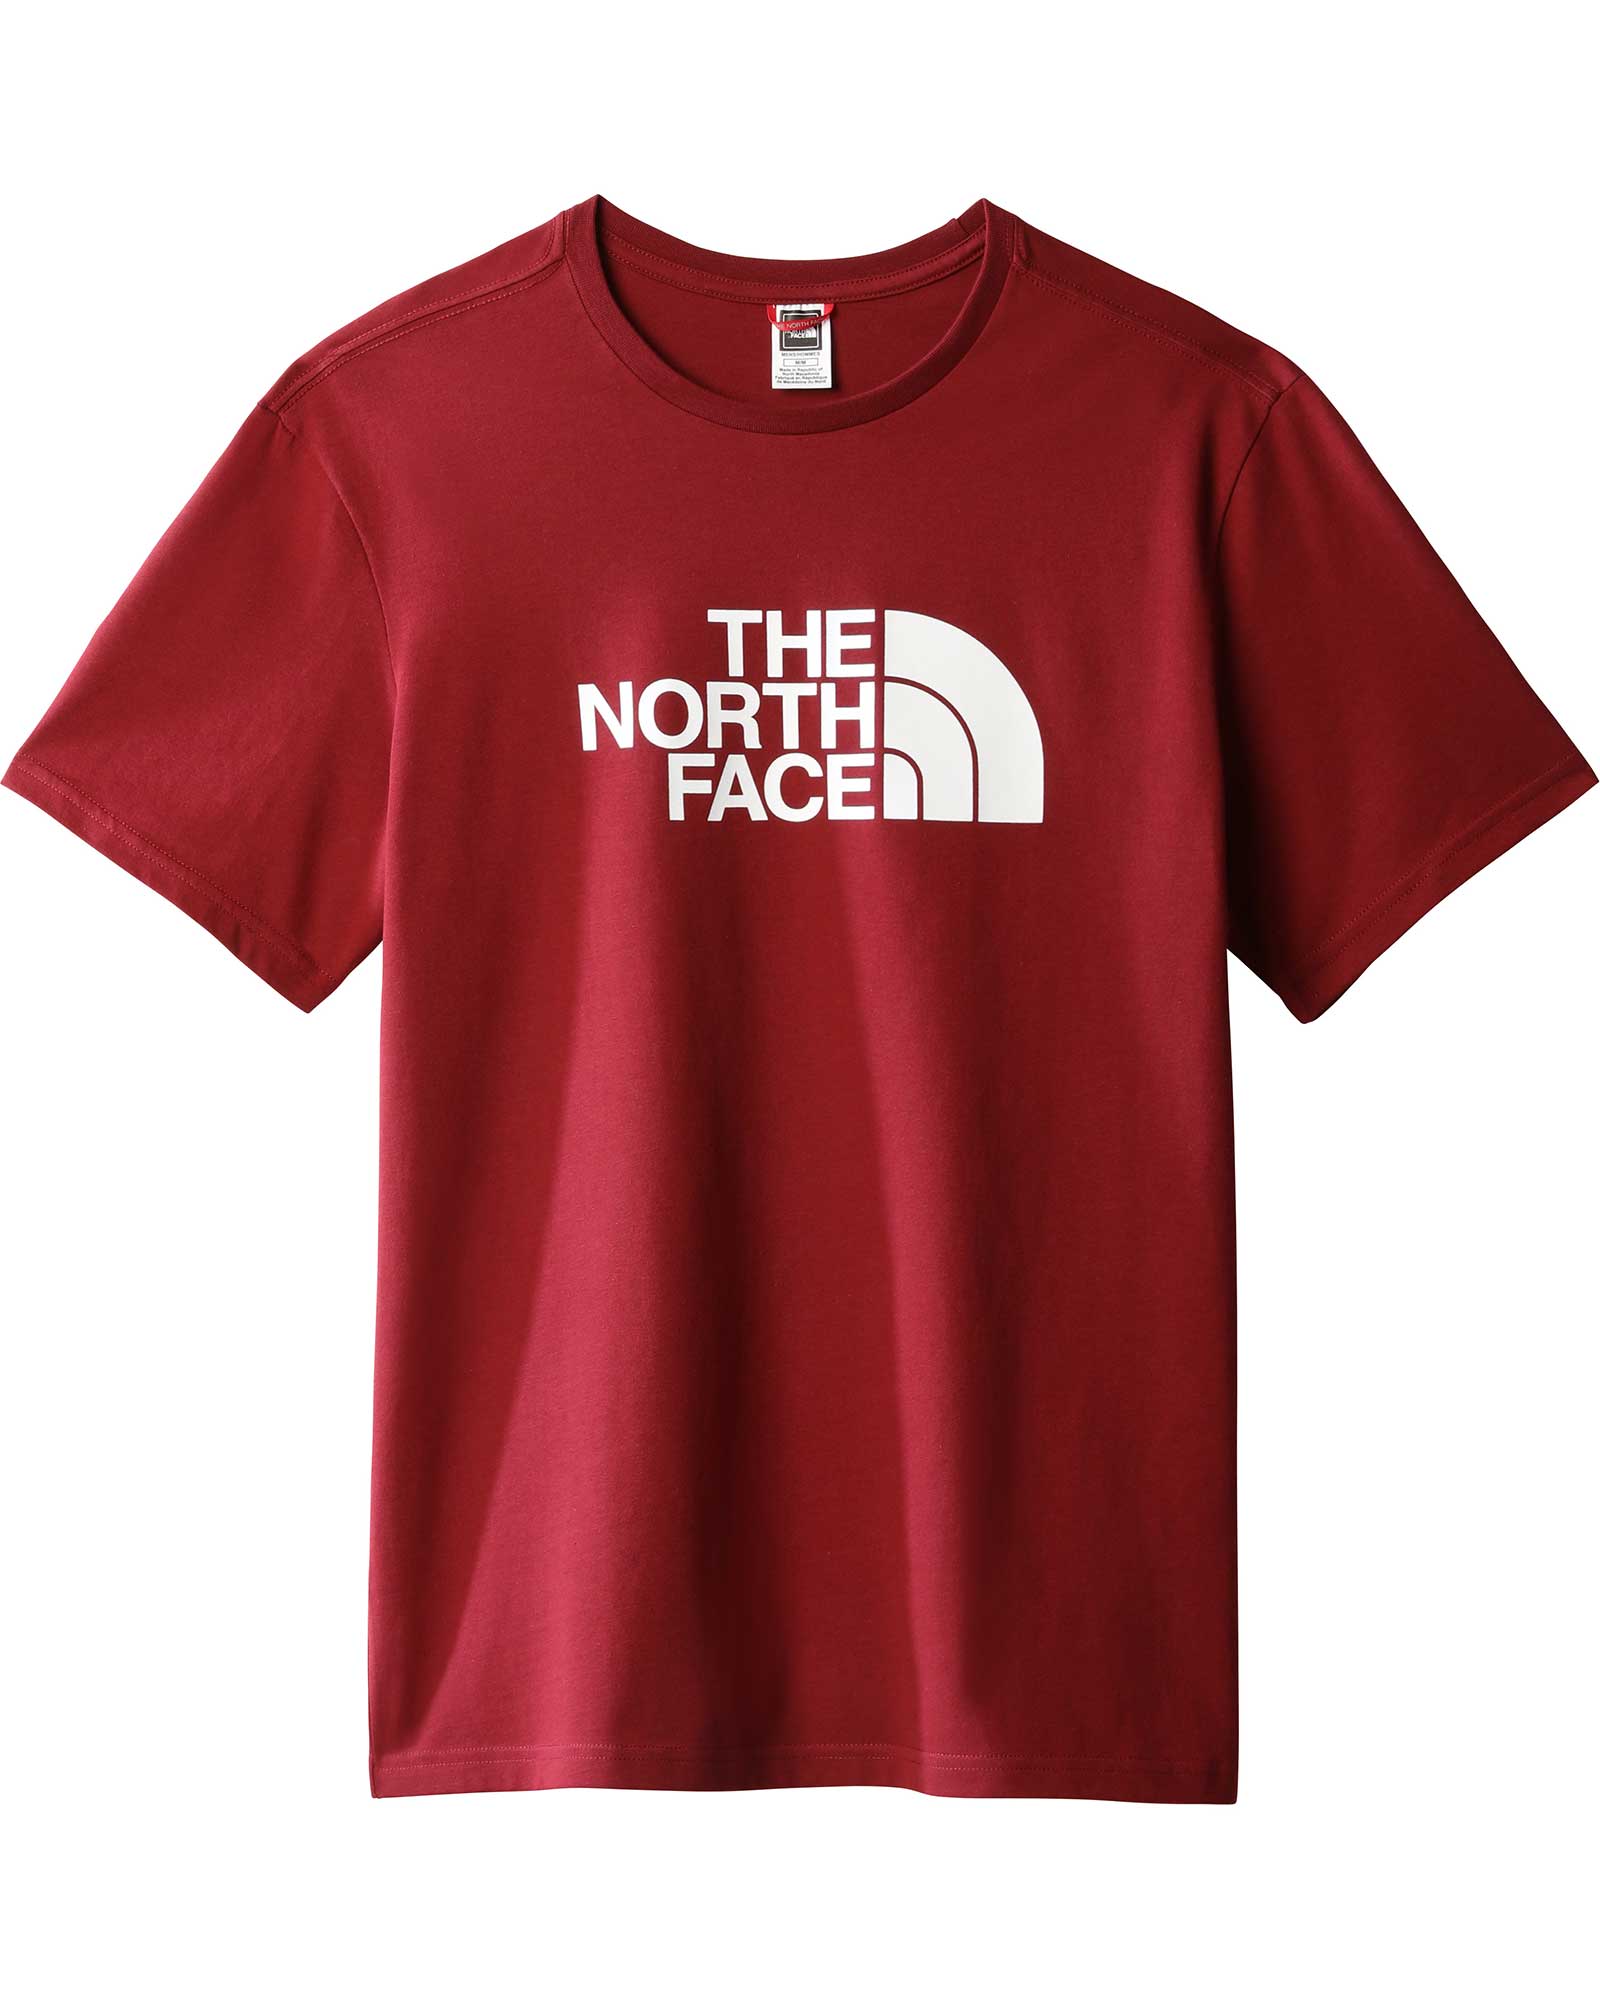 The North Face Easy Men’s T Shirt - Cordovan S